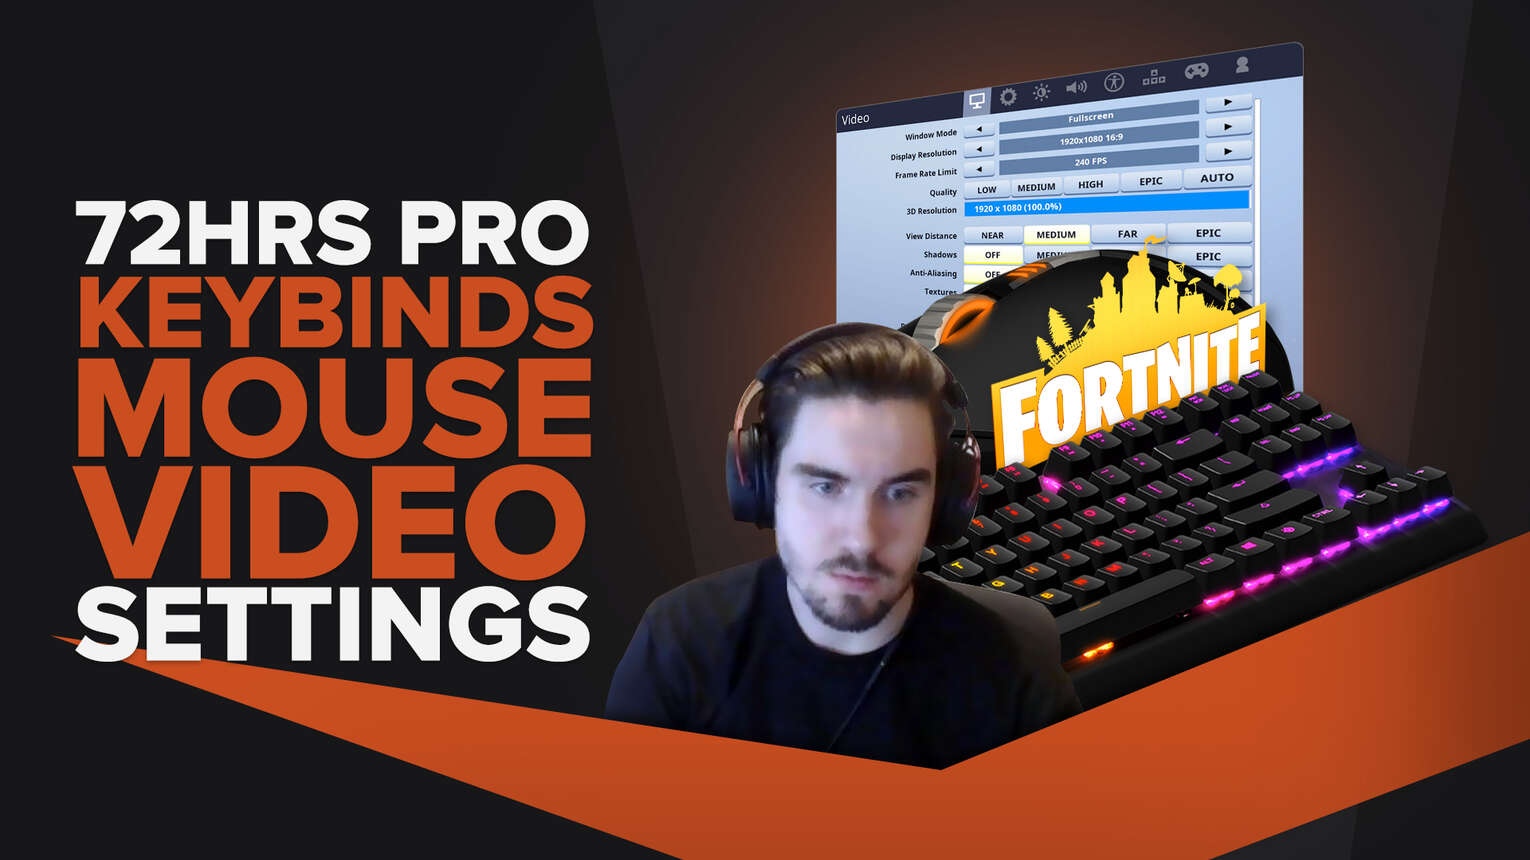 Pro Player 72hrs Fortnite Keybinds Mouse Settings and Video Settings